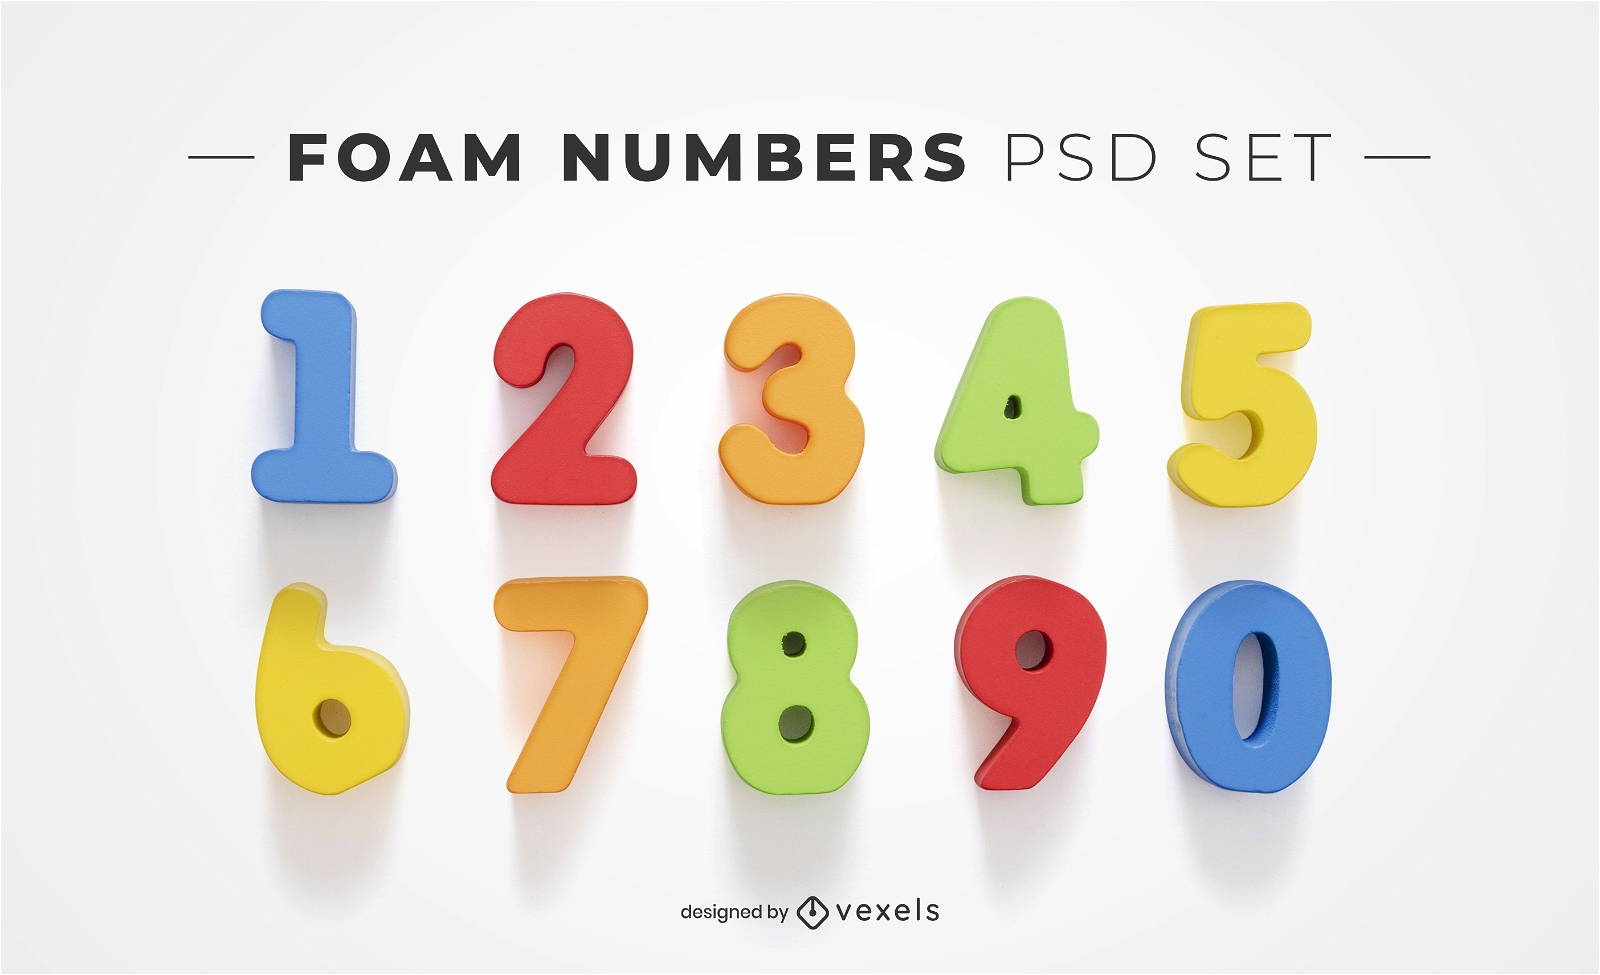 Foam numbers psd elements for mockups